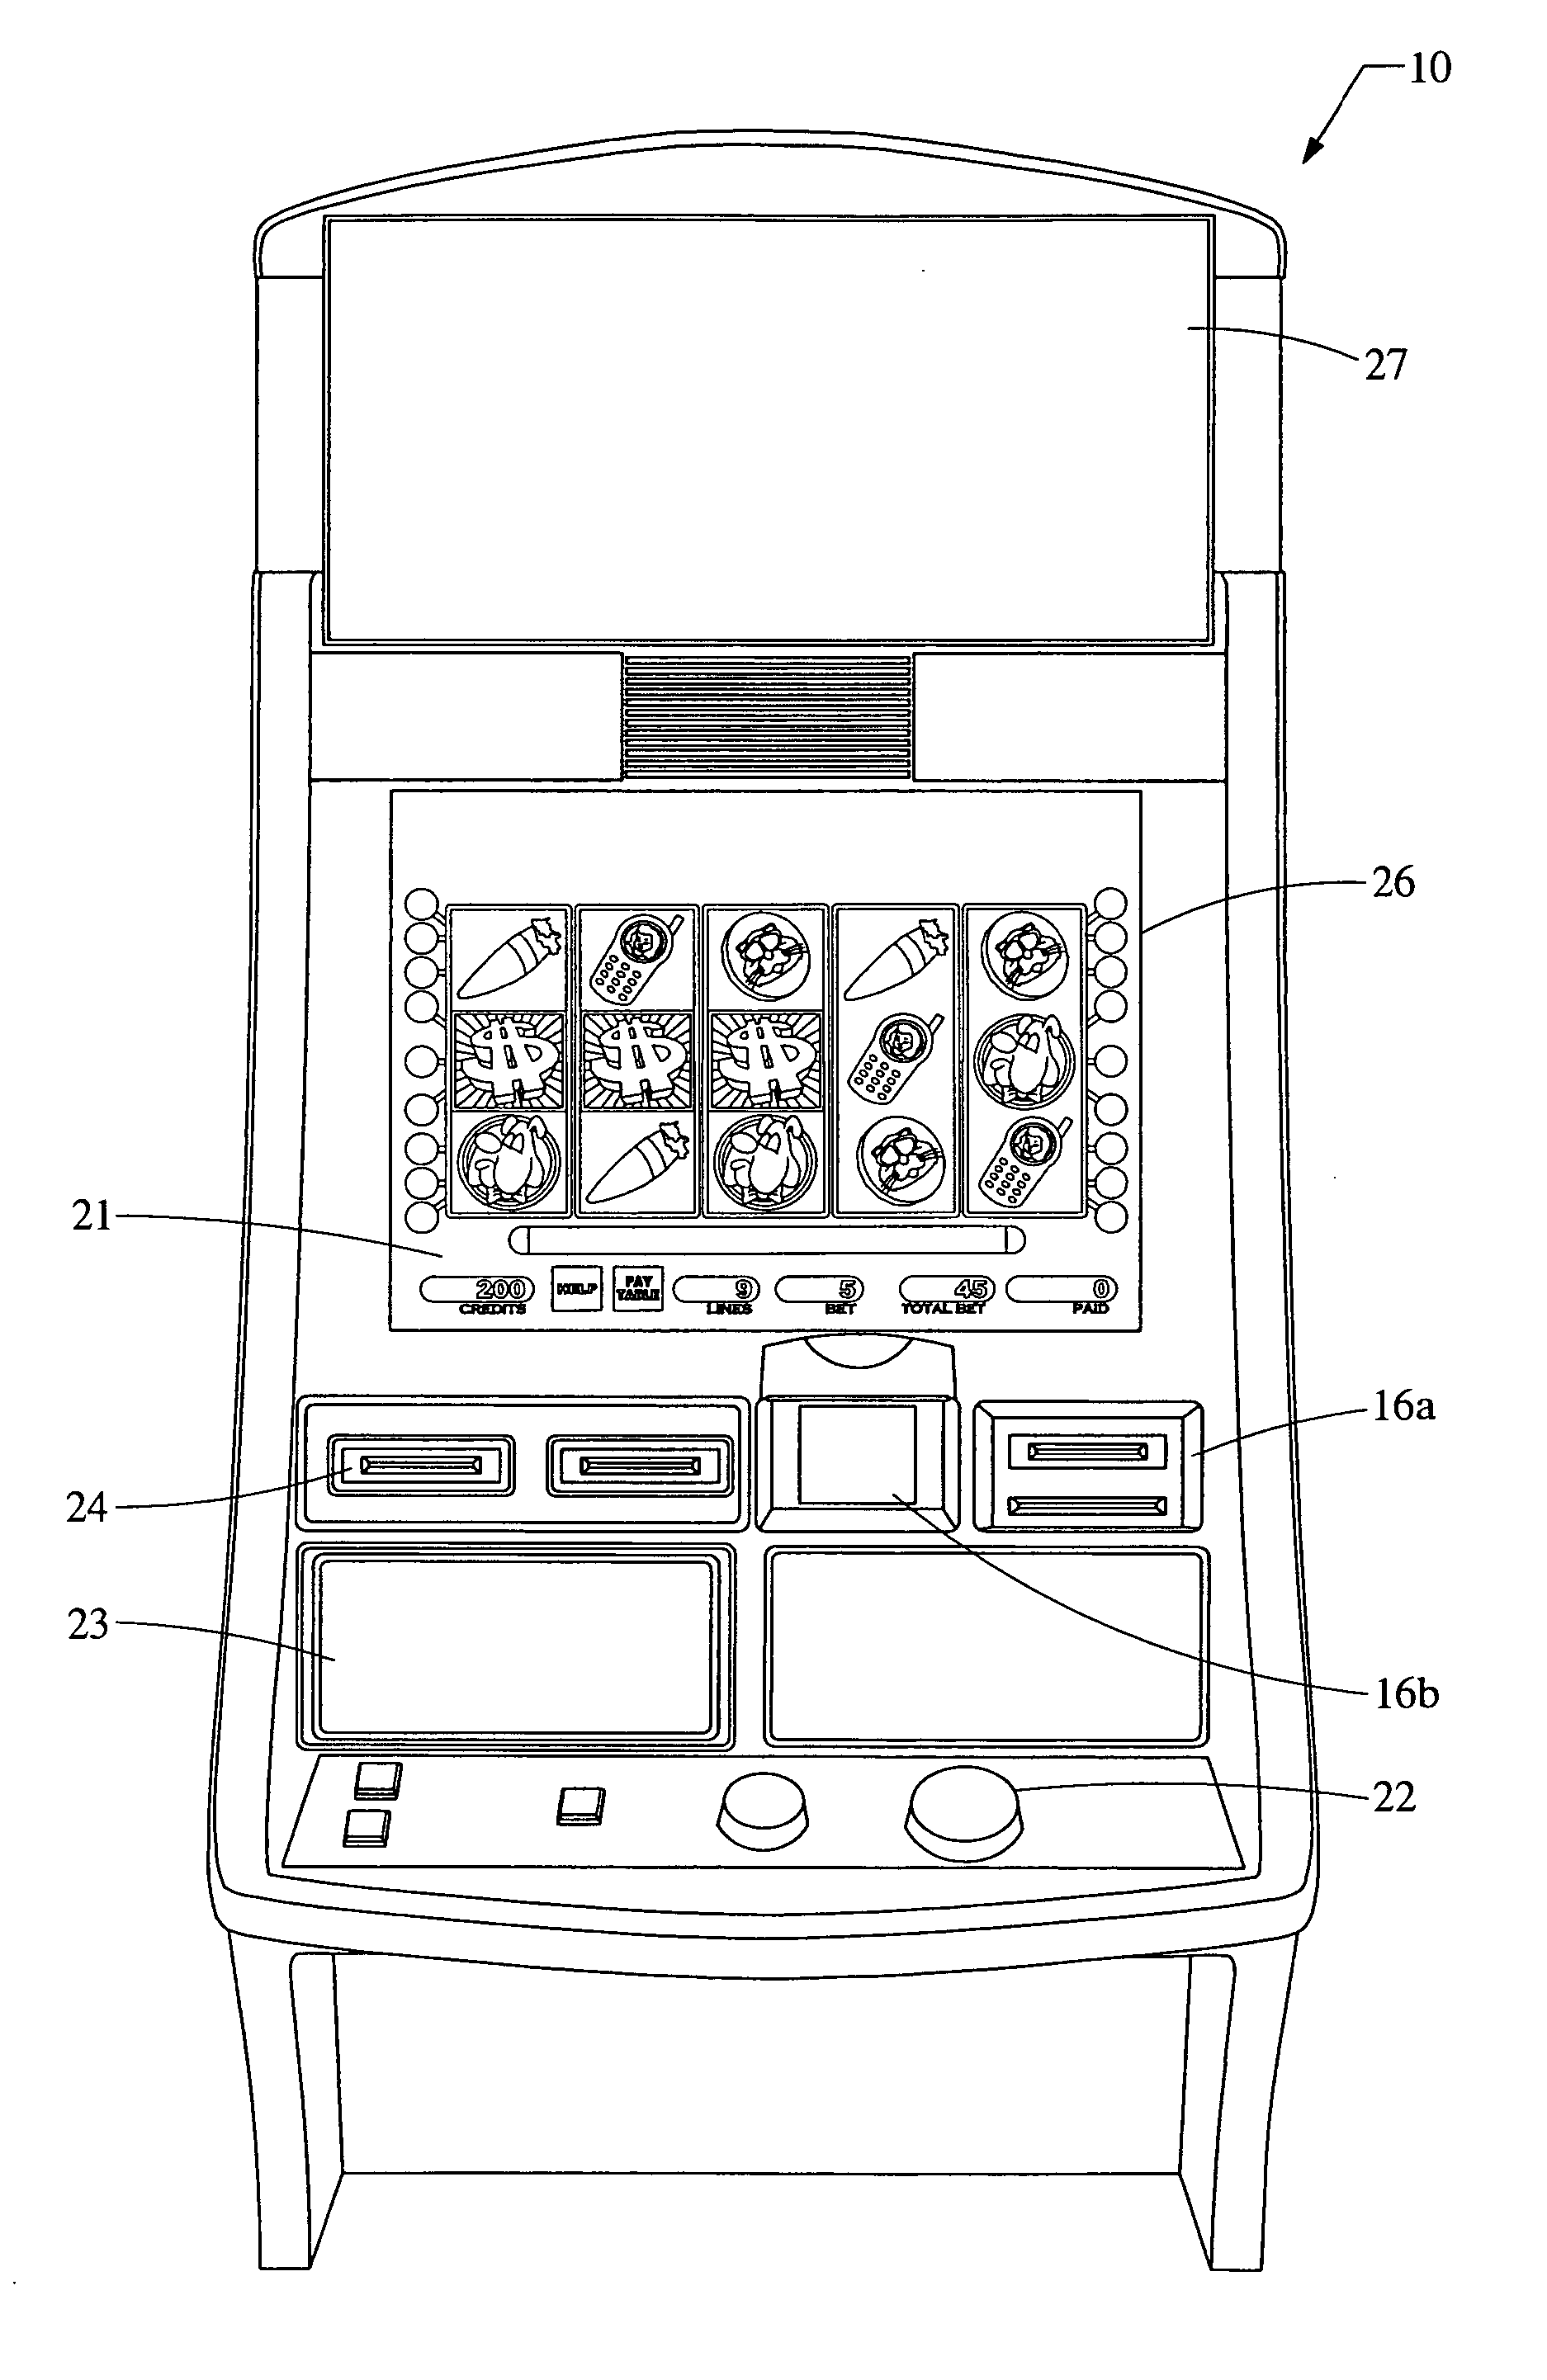 Wagering game with 3D rendering of a mechanical device